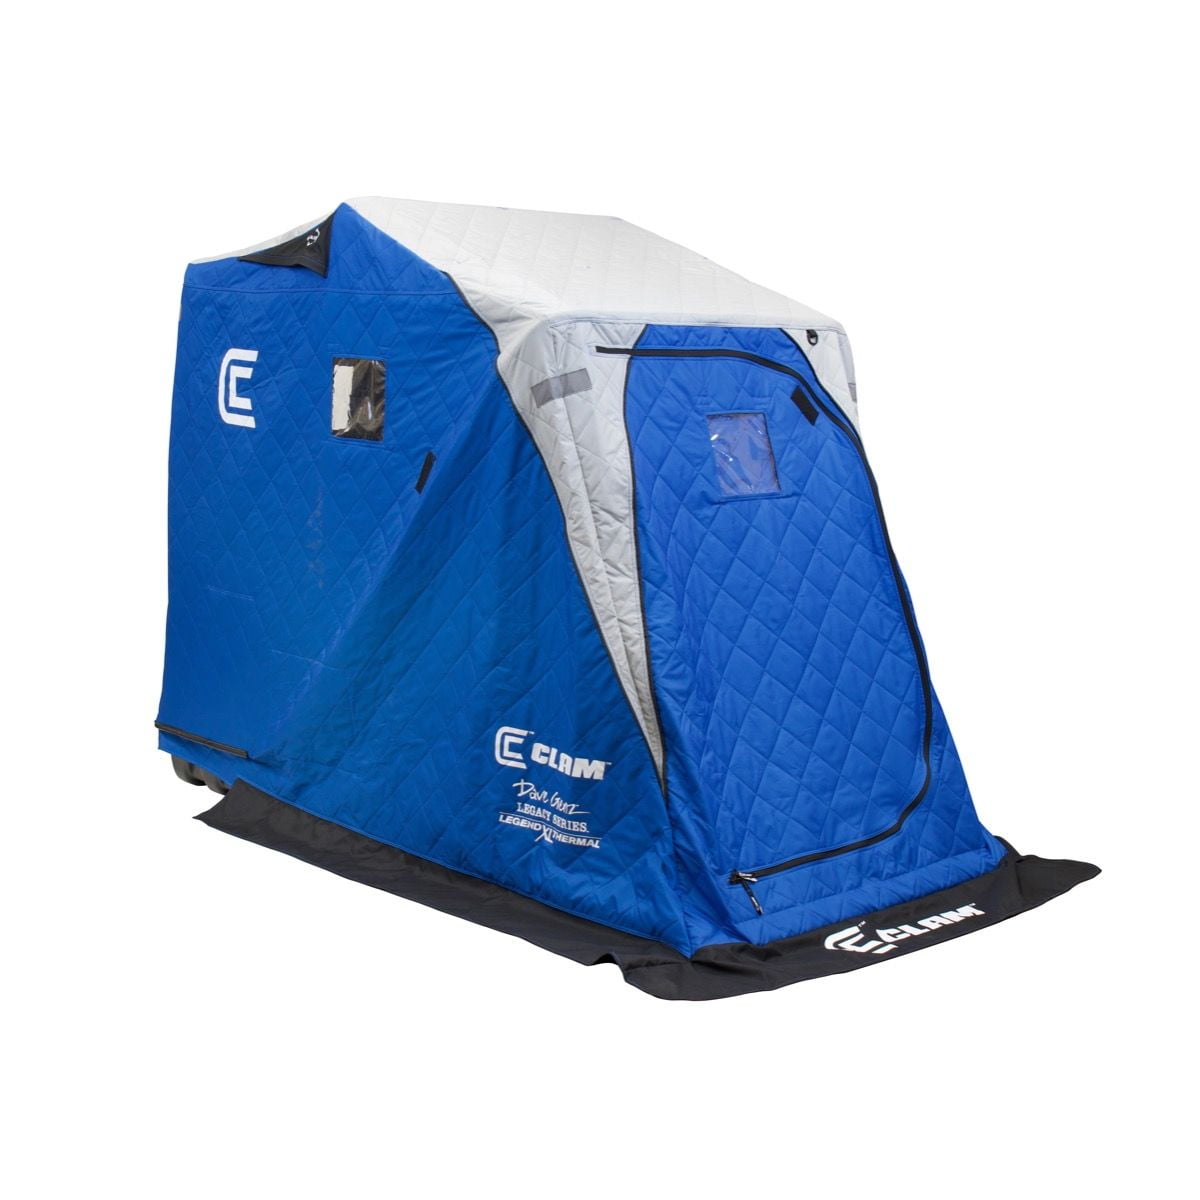 CLAM 12564 Legend XL Thermal Ice Fishing Shelter with Deluxe